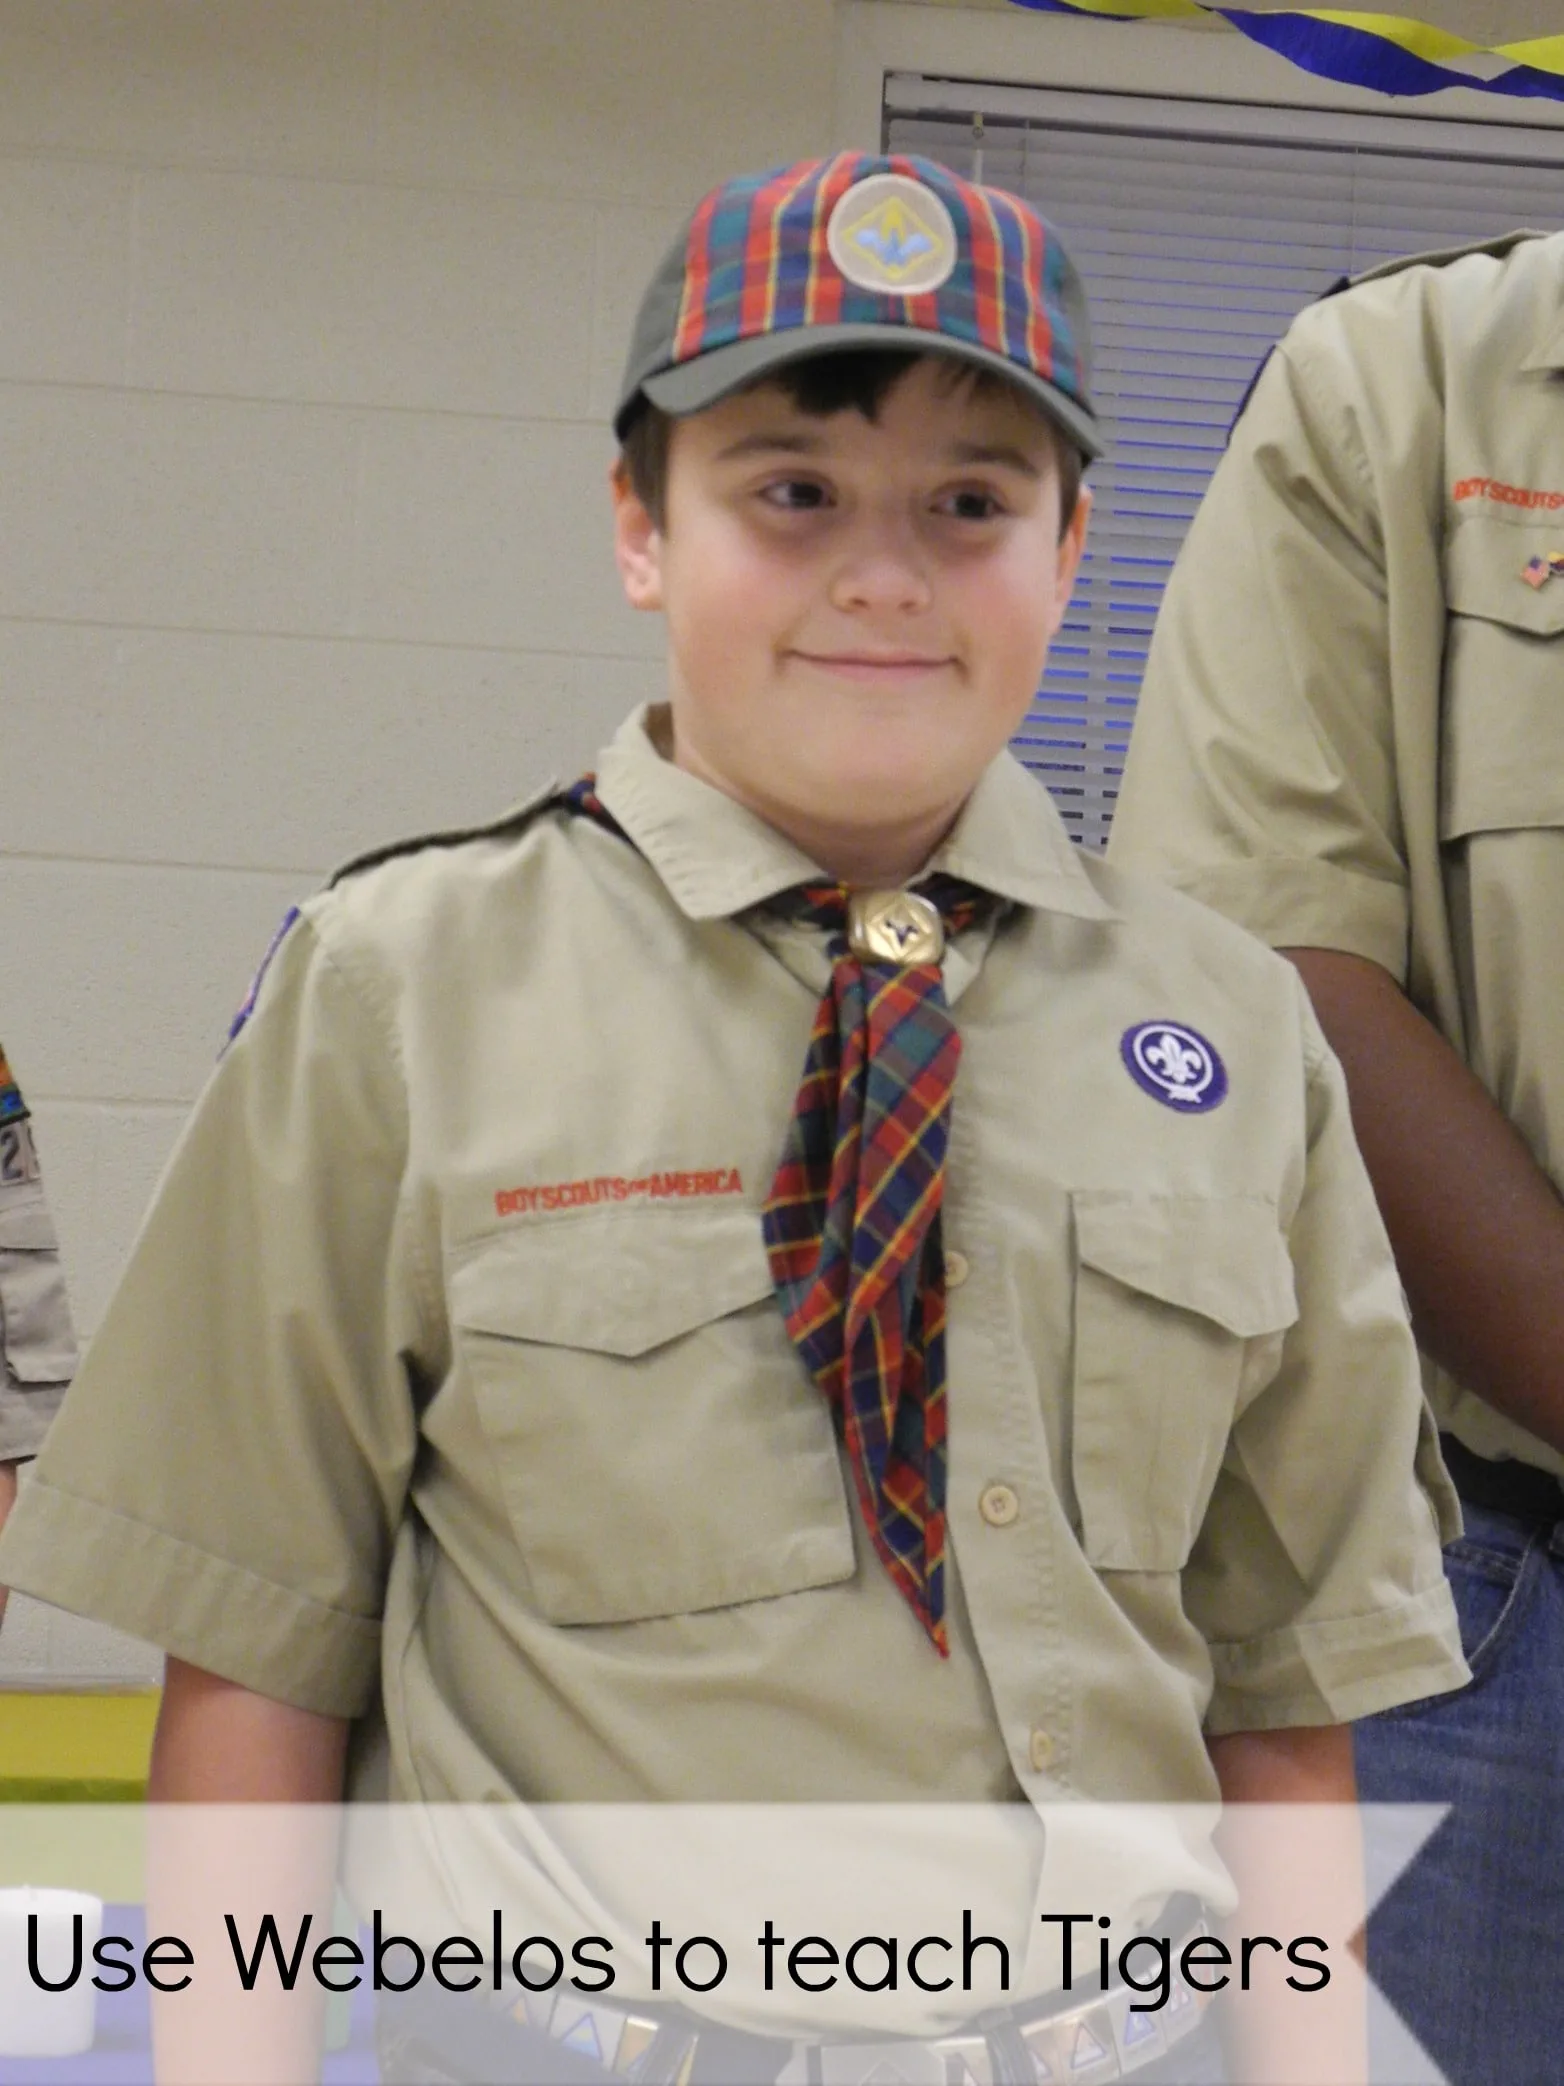 cub scout using webelos to teach tigers